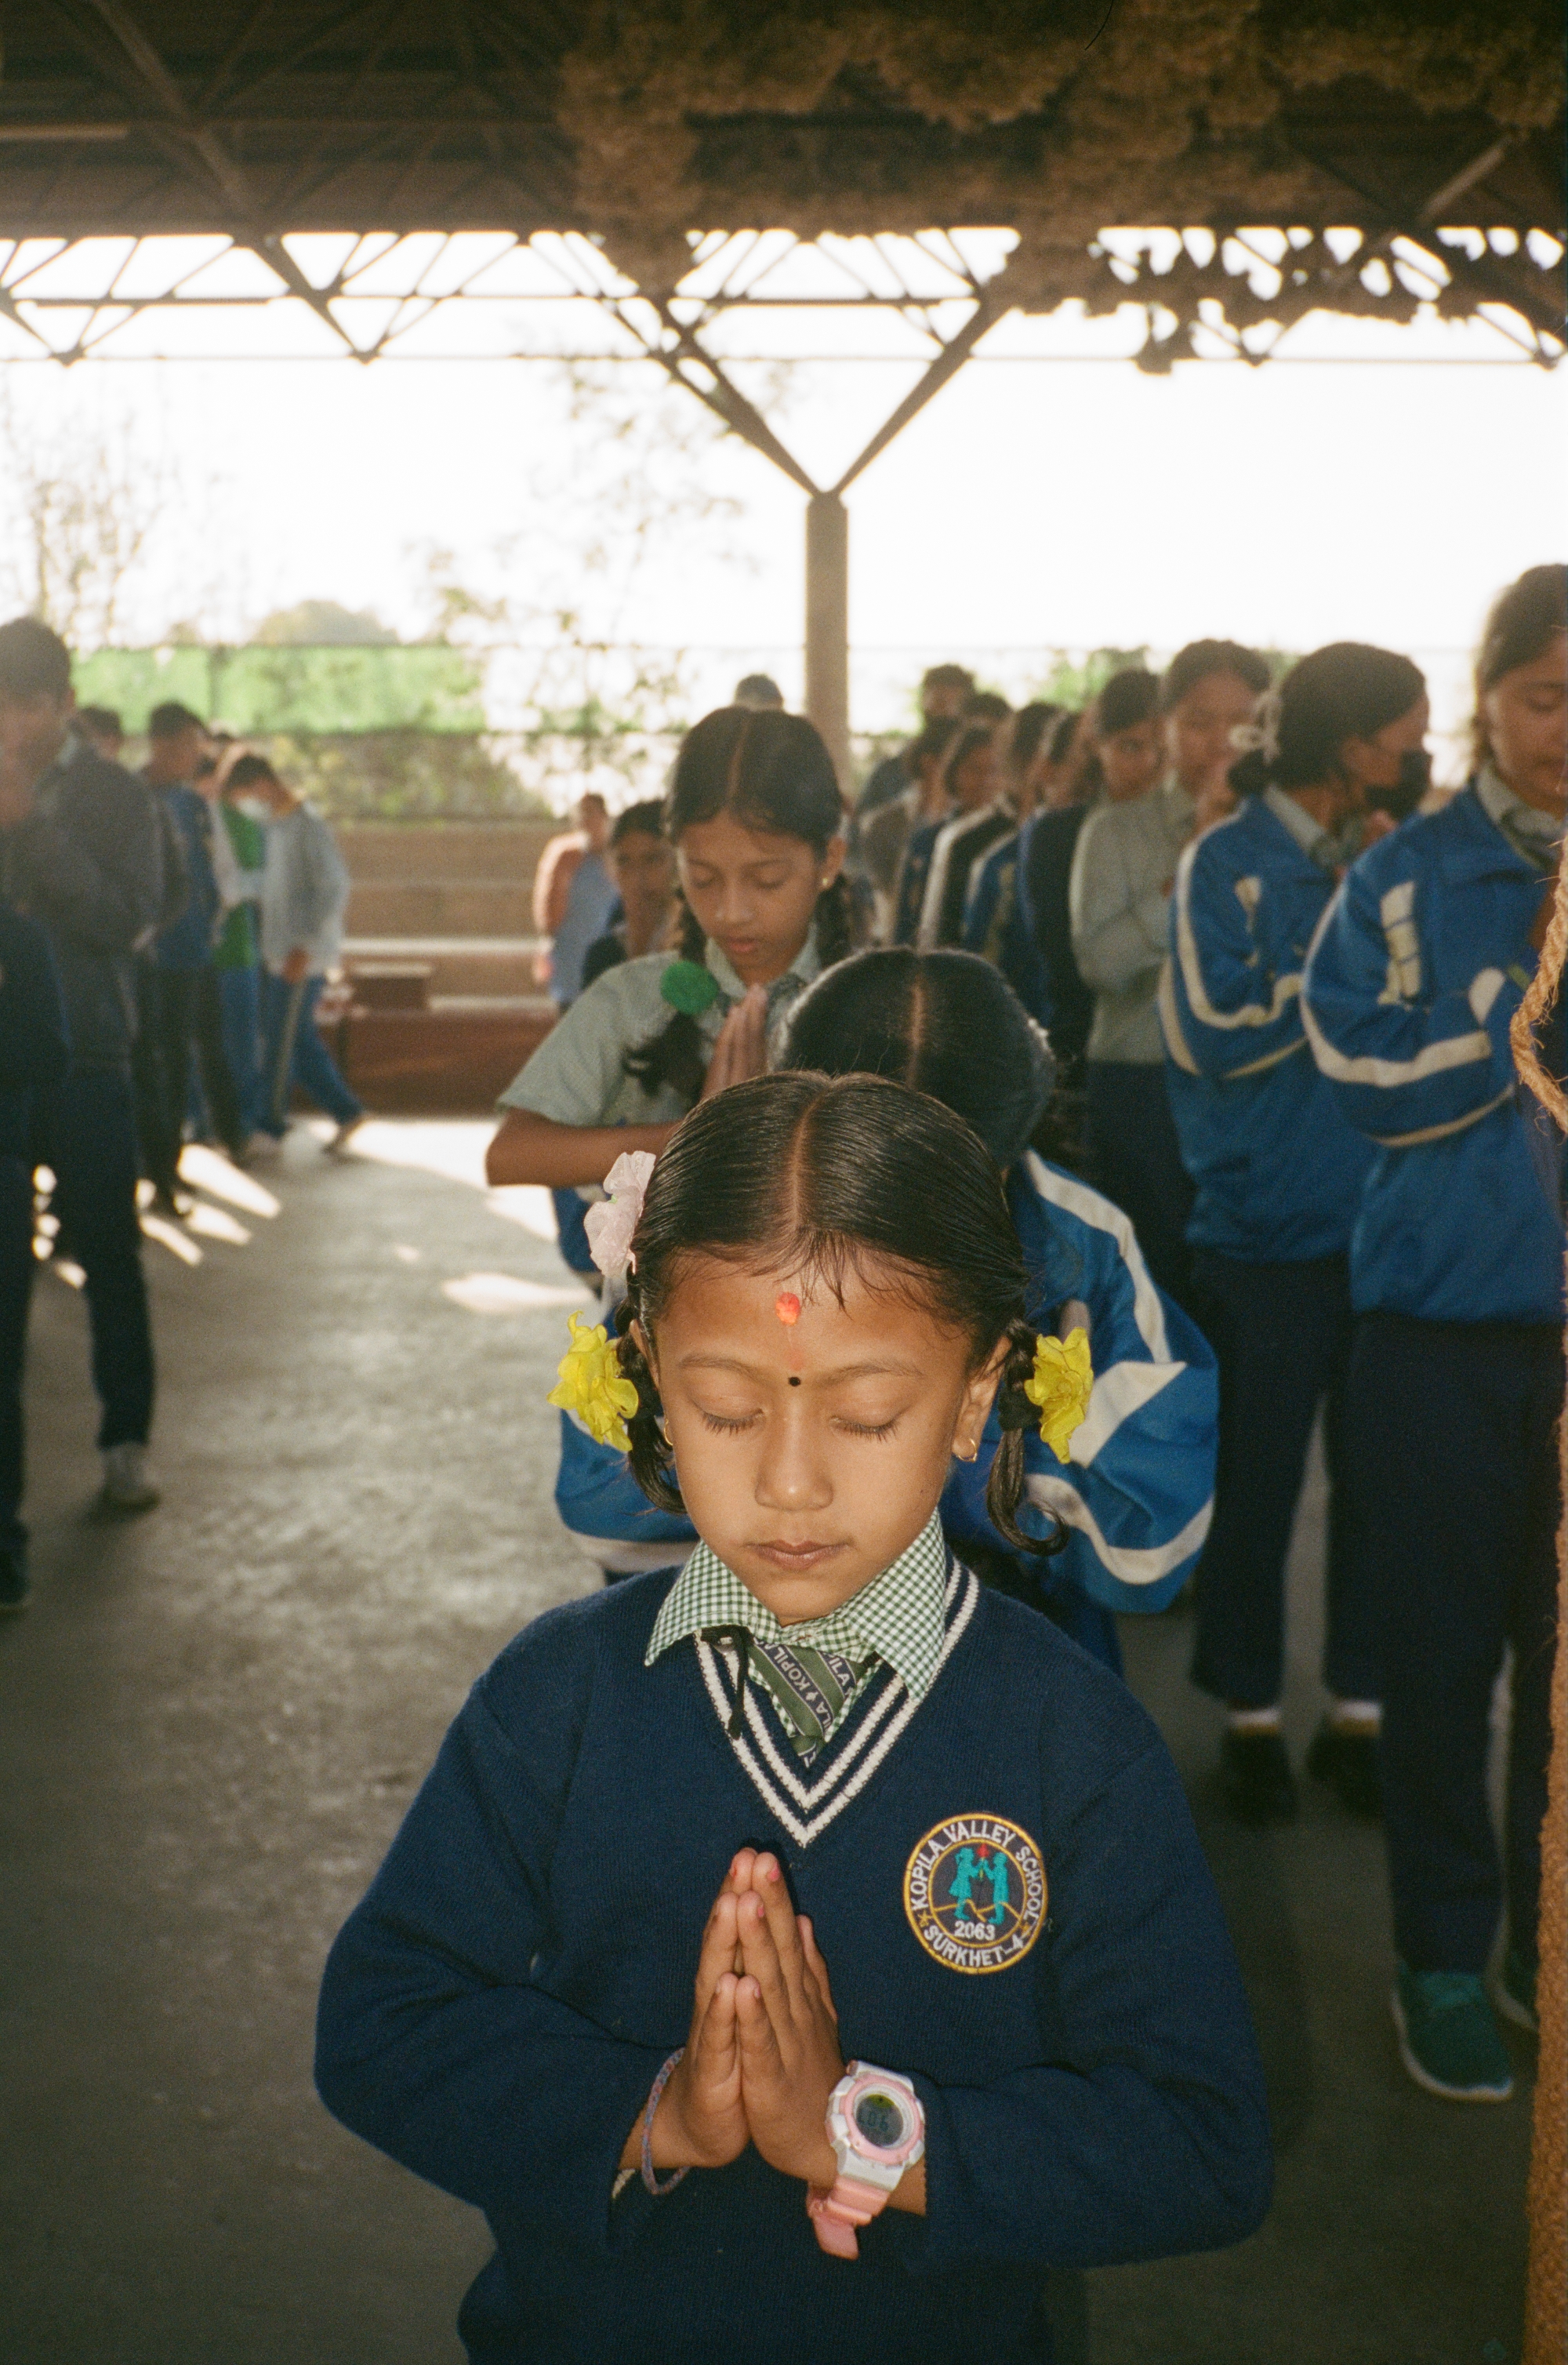 A girl in a school uniform closes her eyes in meditation, while standing with a line of children behind her.